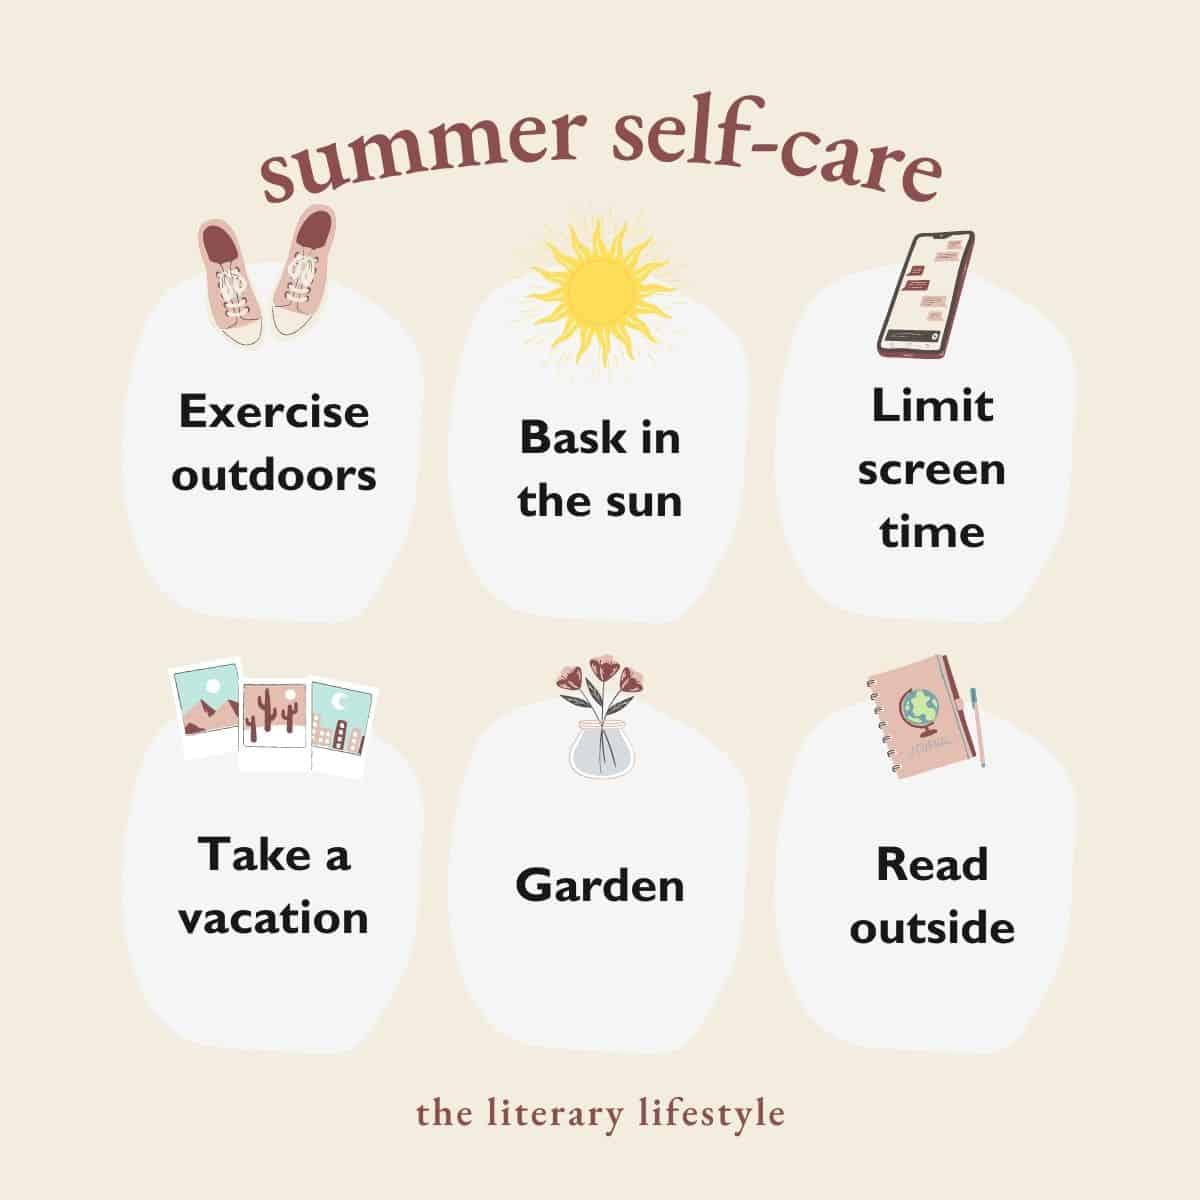 75 Summer Self-Care Ideas and Challenge to Relax